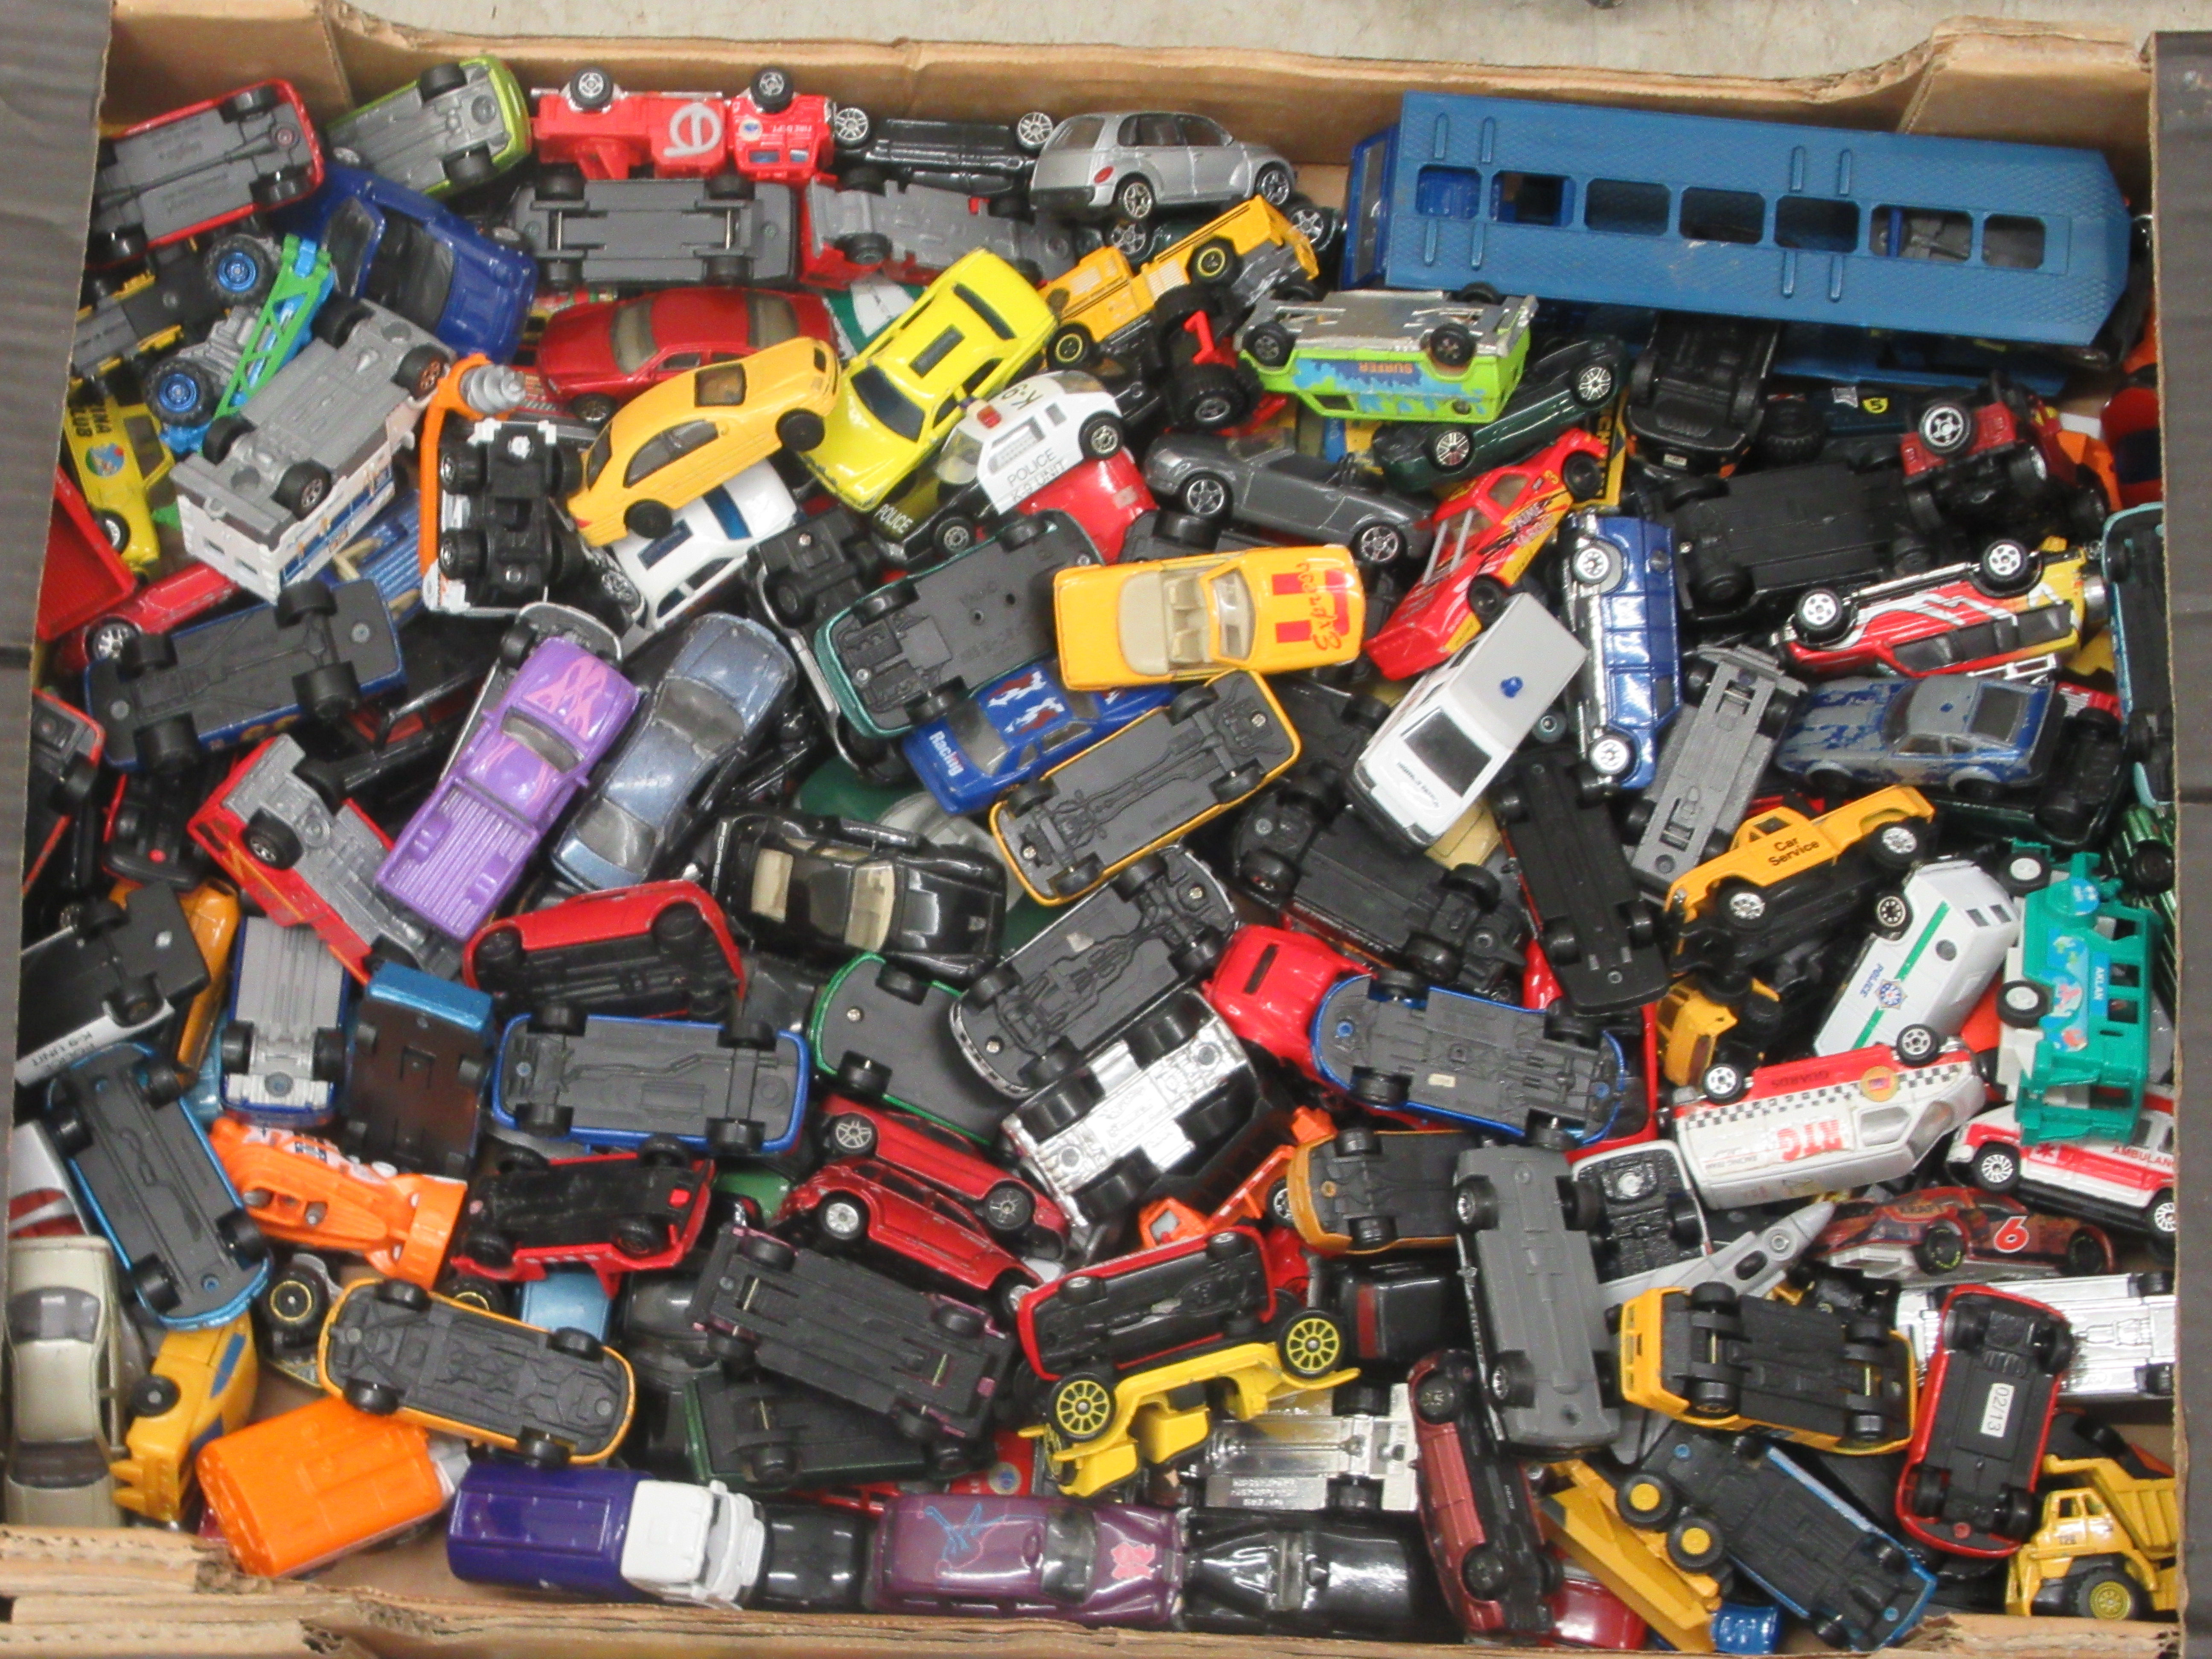 Uncollated diecast model vehicles, sports cars, convertibles, vans and emergency services: to - Image 2 of 3